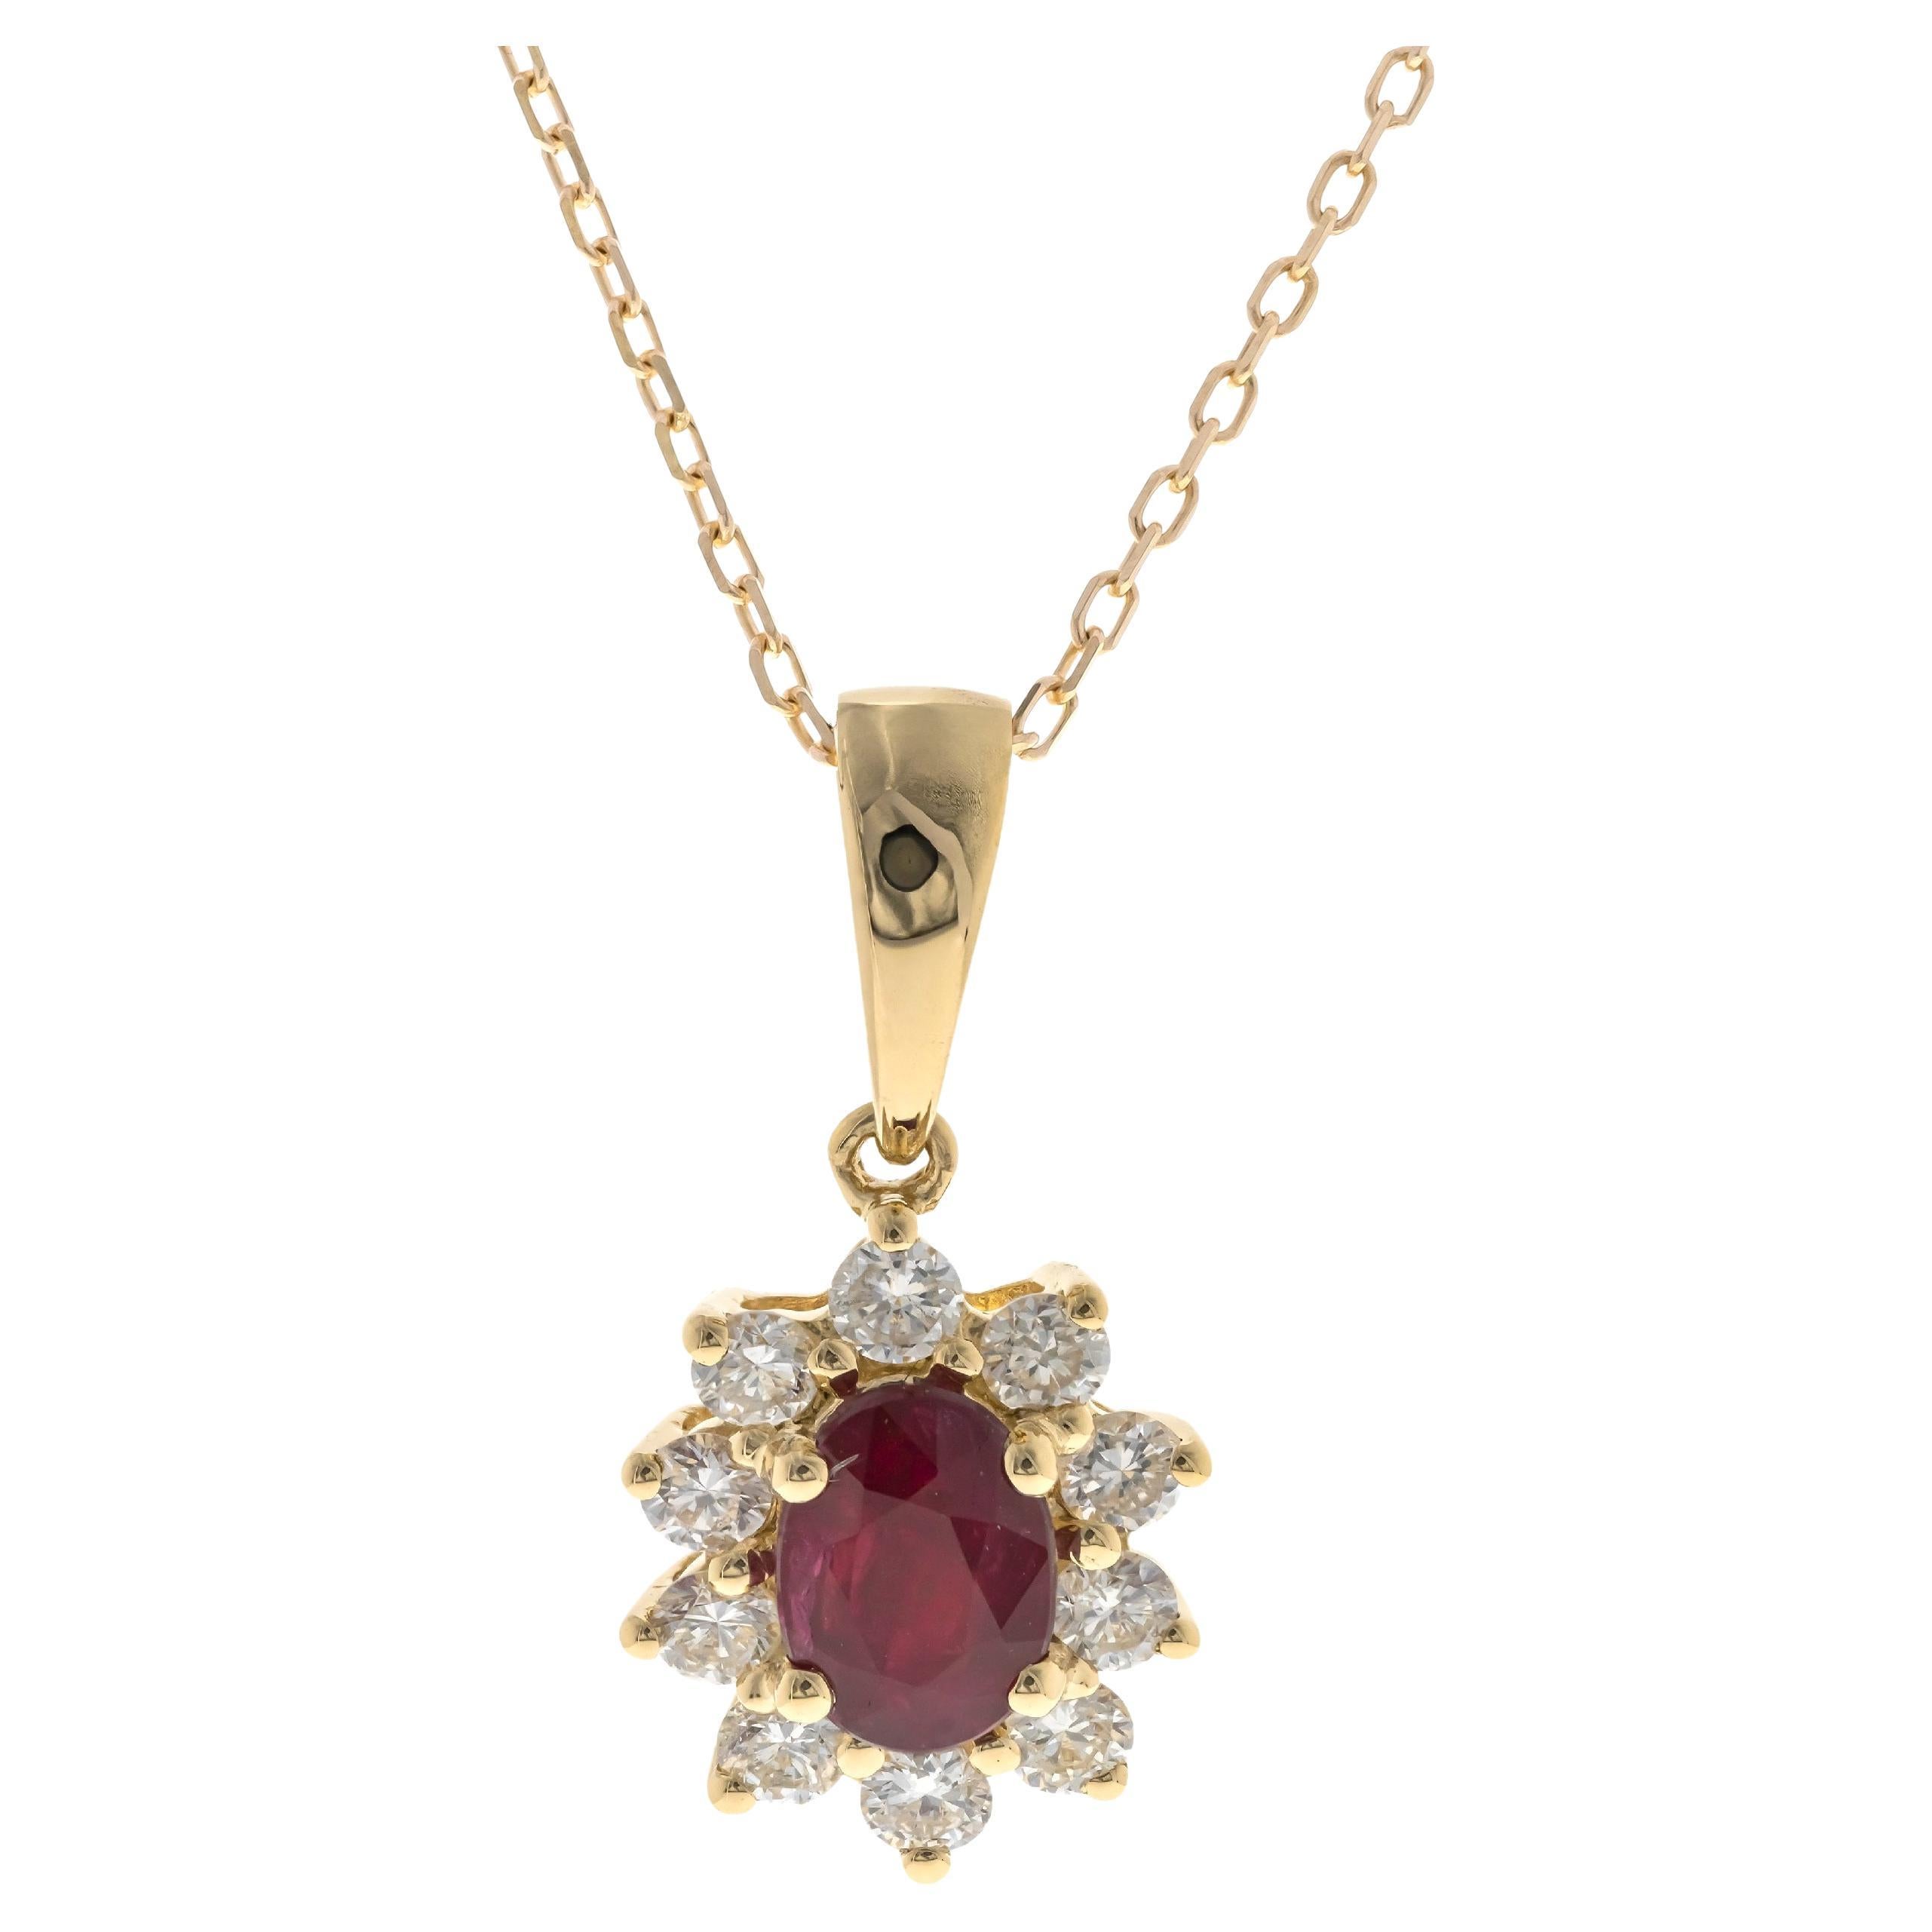 0.64 Carat Oval-Cut Ruby with Diamond Accents 14K Yellow Gold Pendant